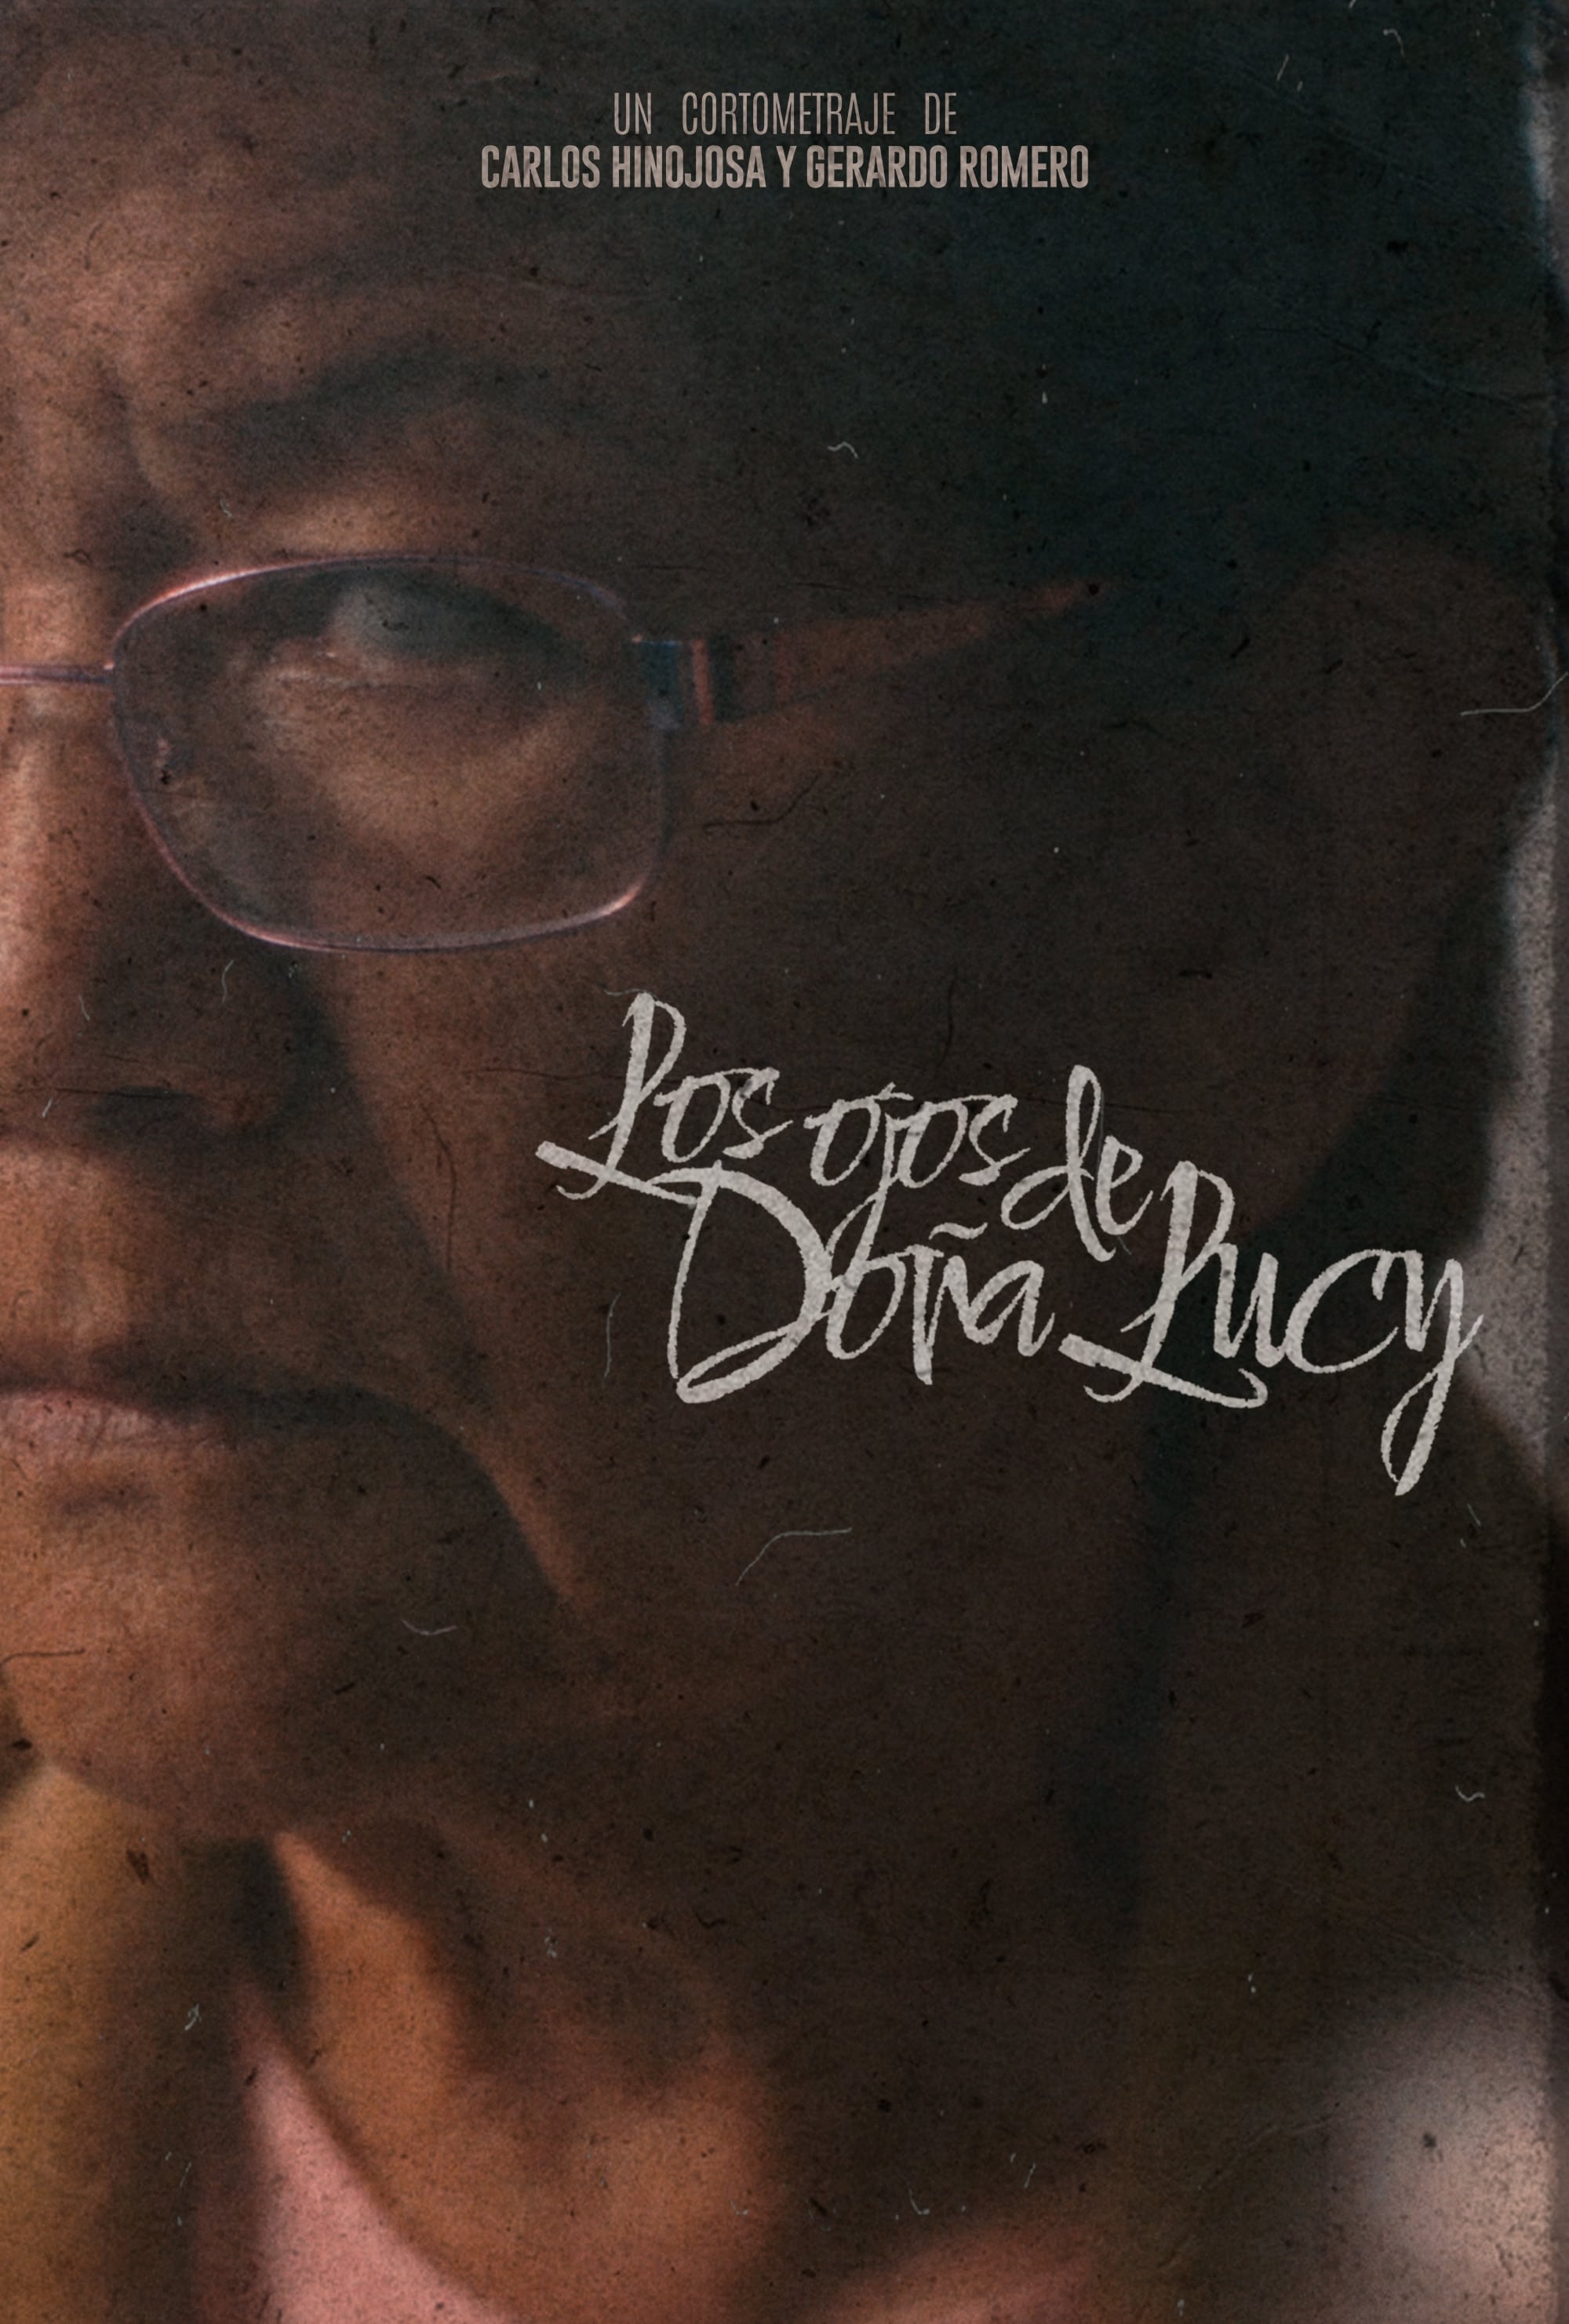 The Eyes Of Doña Lucy movie